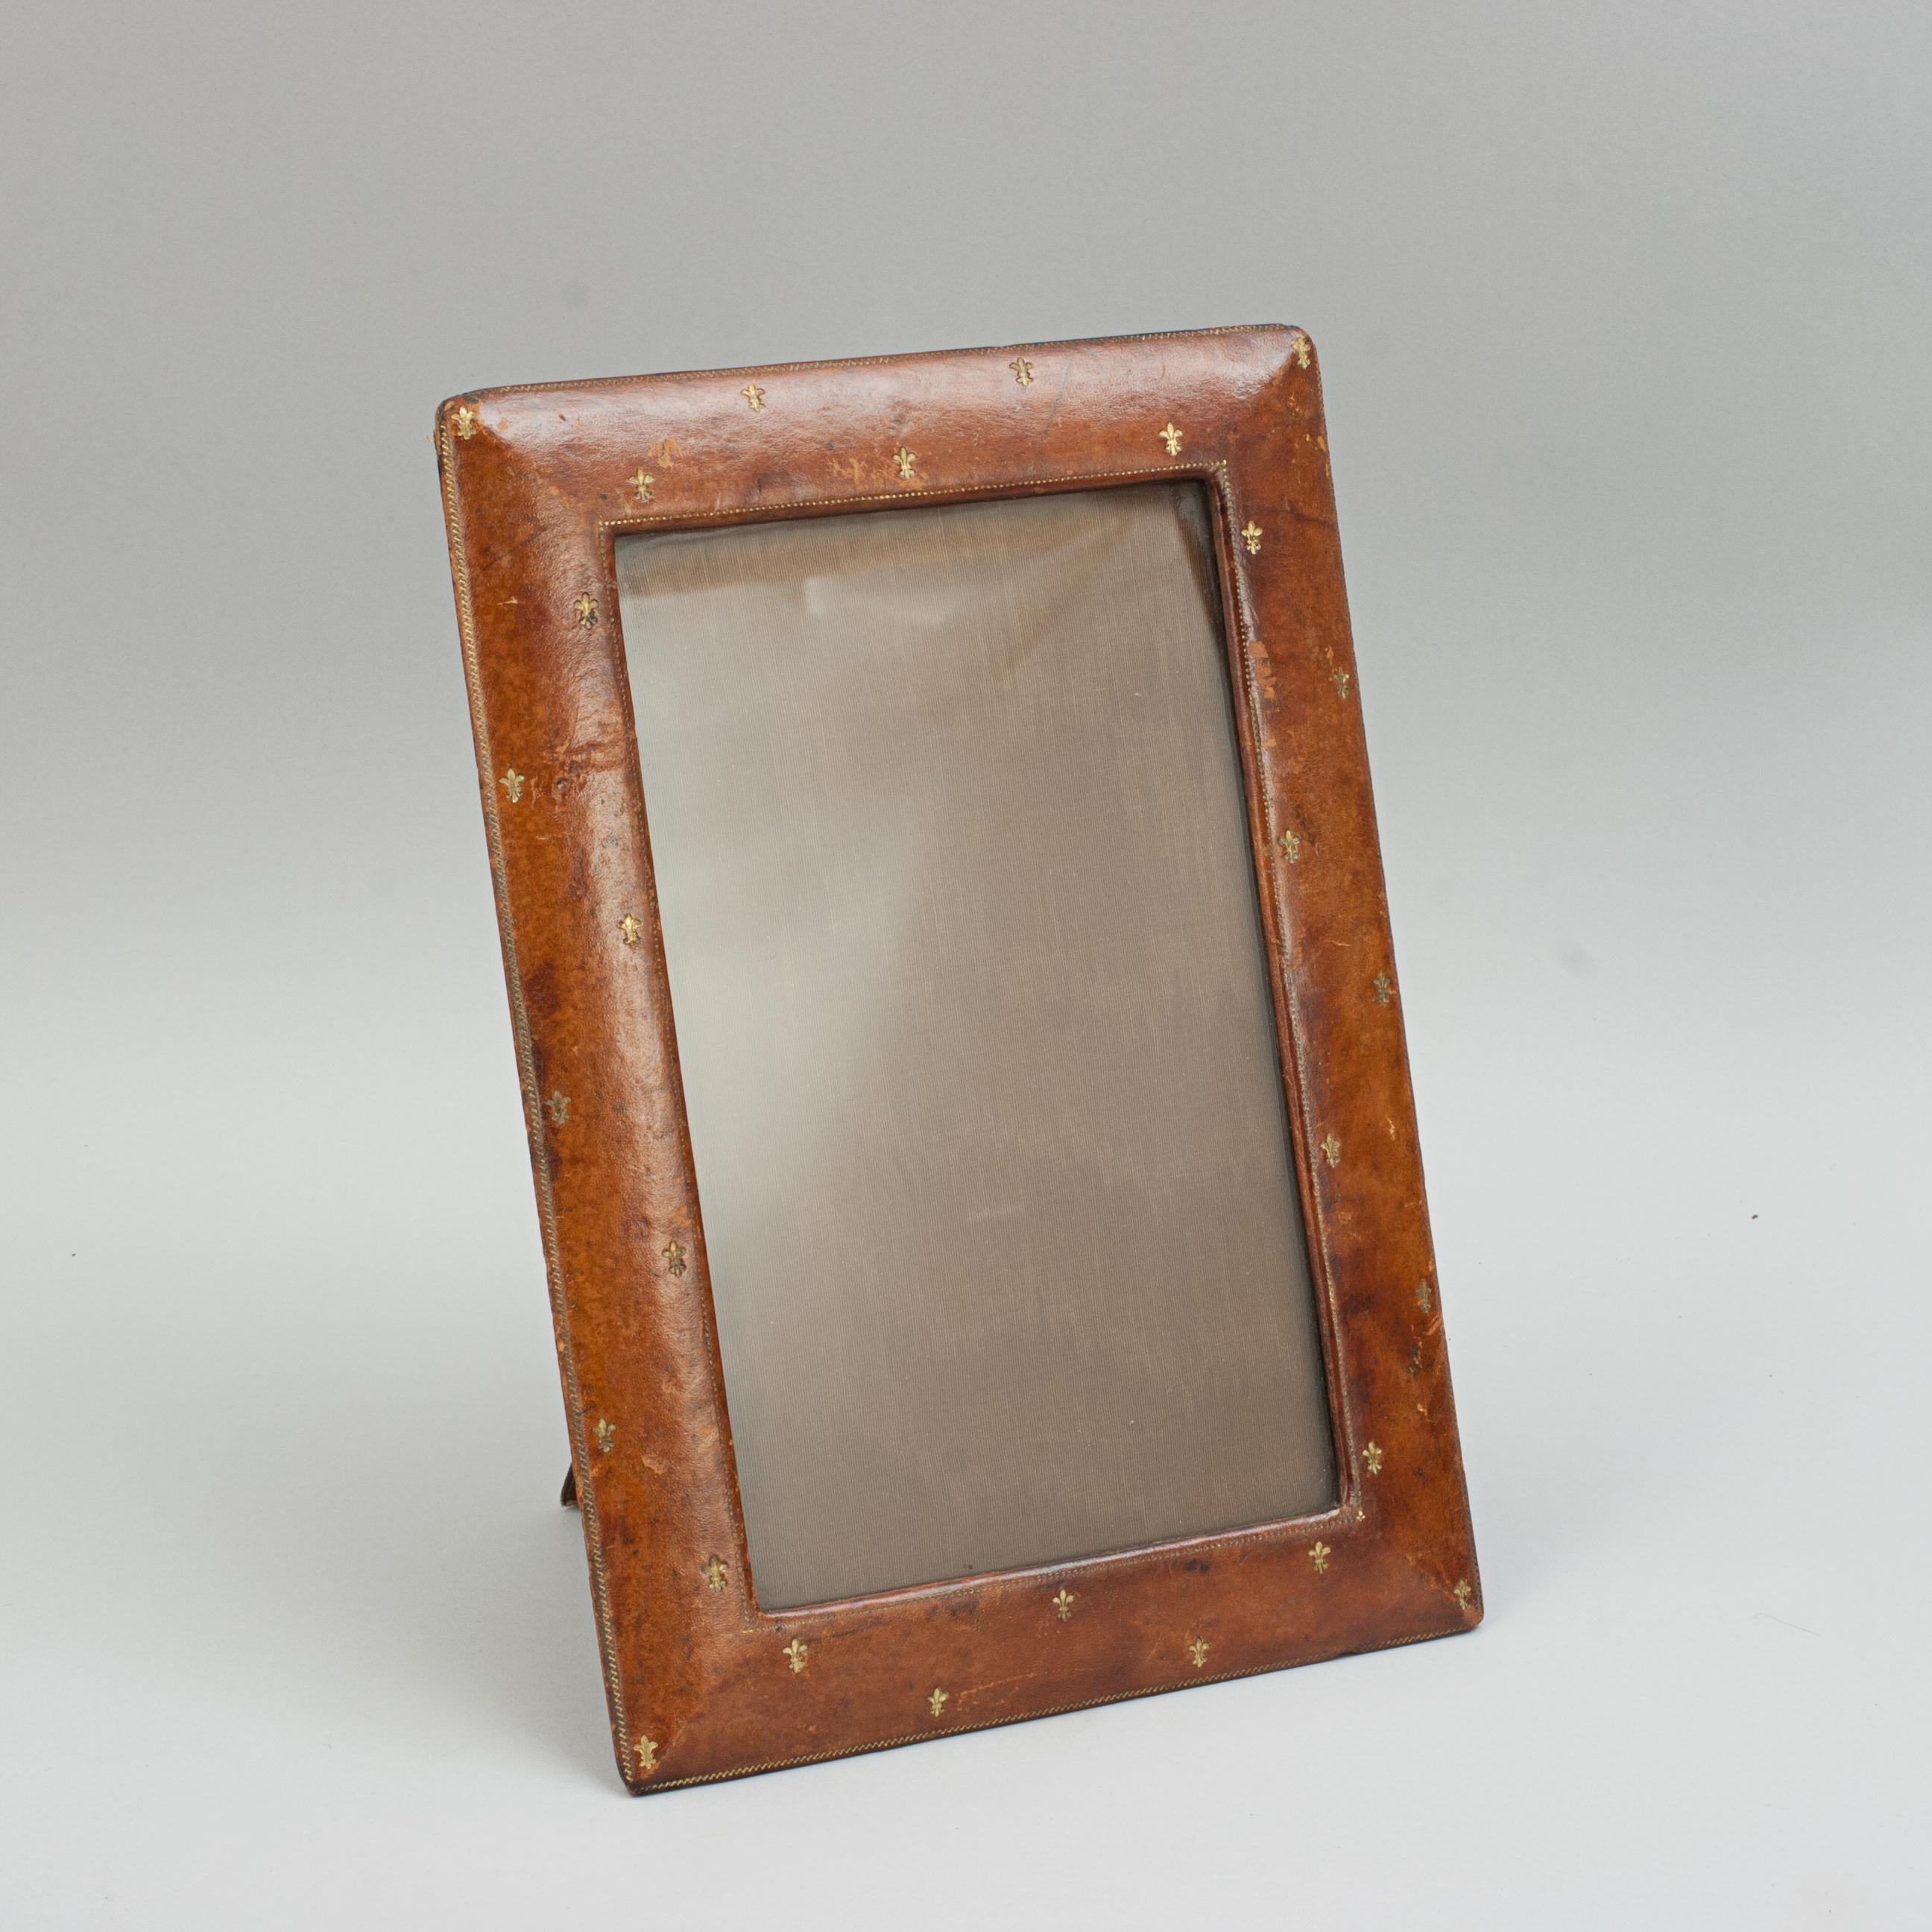 Vintage rectangular leather photo frame.
A tan leather photo frame, portrait style, with an extendable support leg to the rear. The frame with gilt decoration of embossed fleur-de-lis (also spelled fleur-de-lys). The aperture size is 9